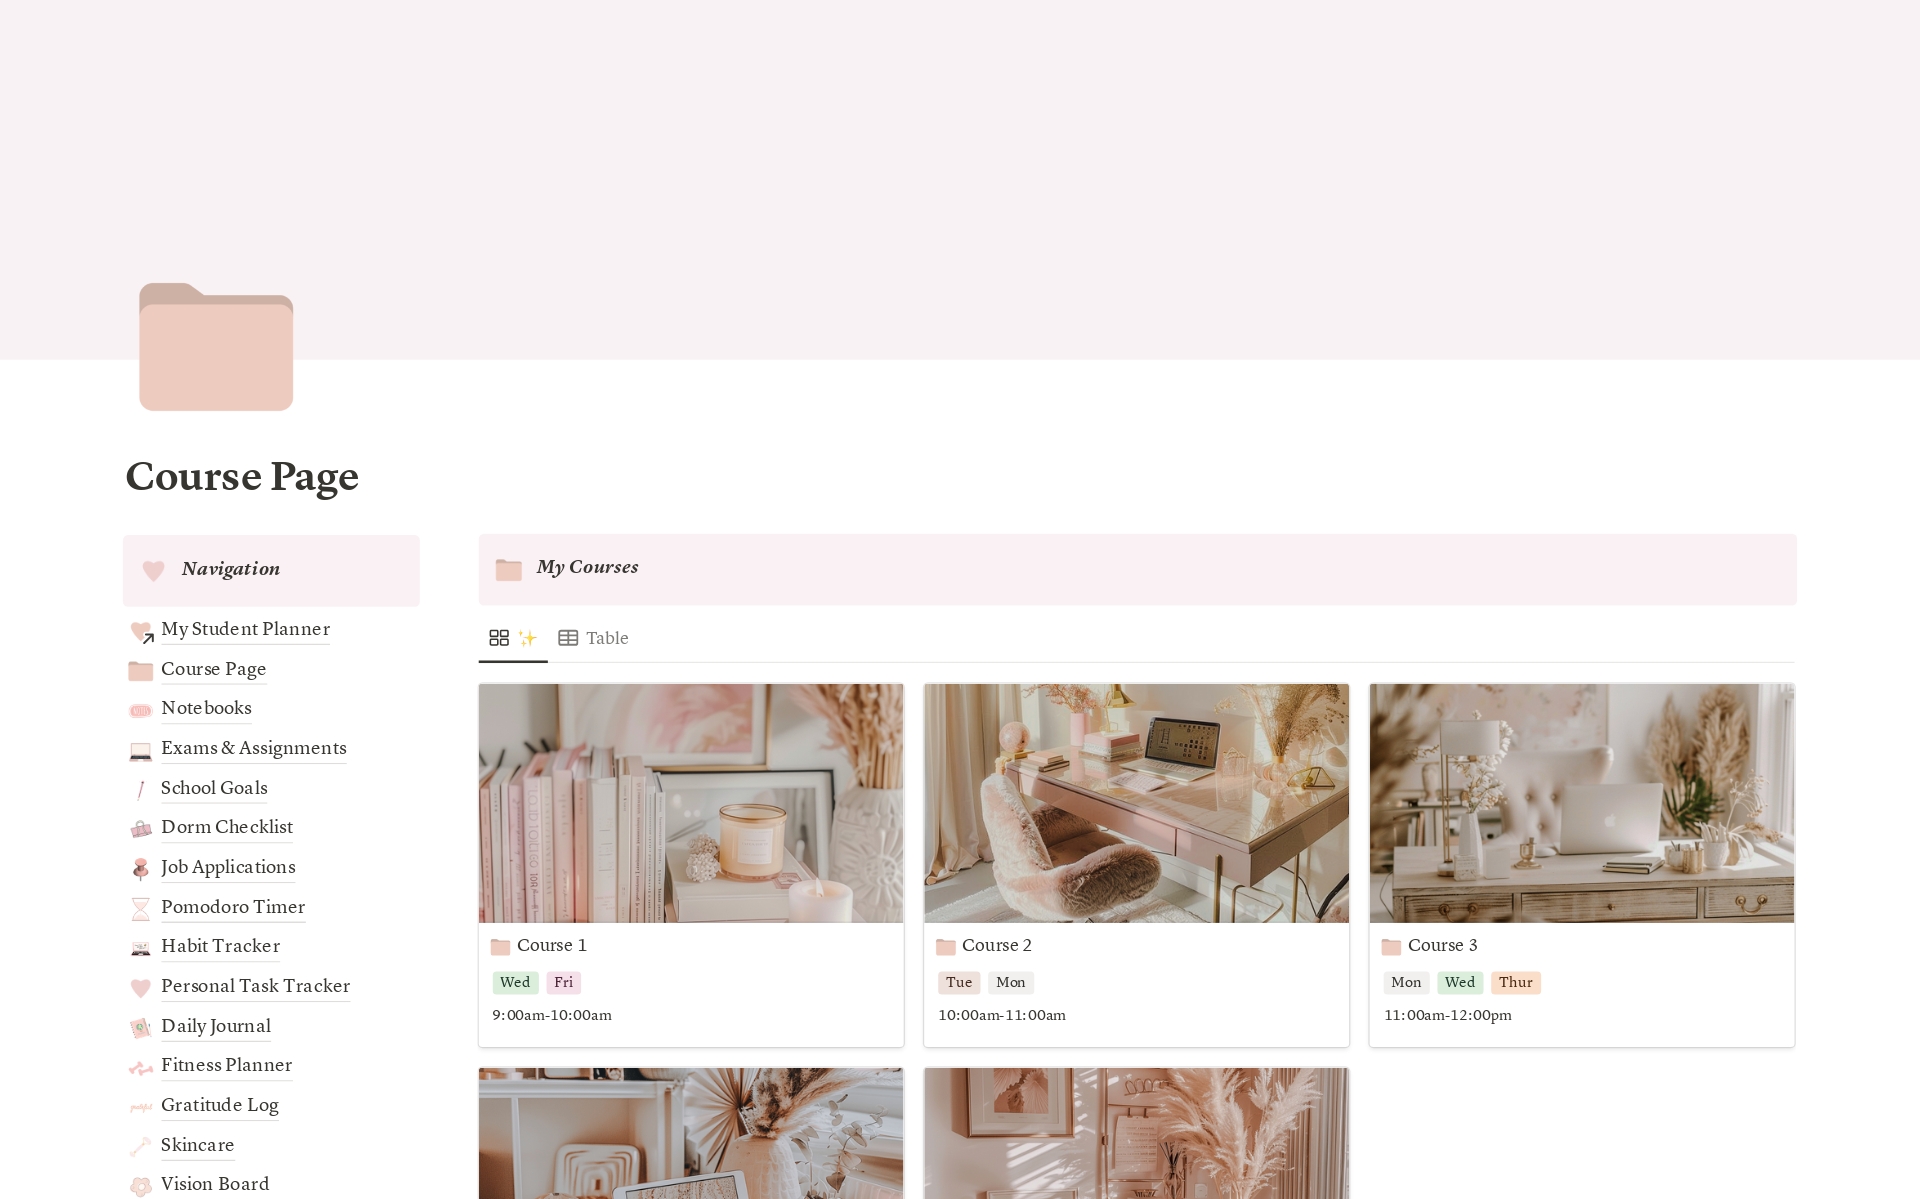 Introducing all in one pink aesthetic student notion template. This gorgeous, practical tool helps you organize courses, take notes, plan assignments, manage job applications, and more. Features include daily schedules, Pomodoro timers, habit trackers and more.